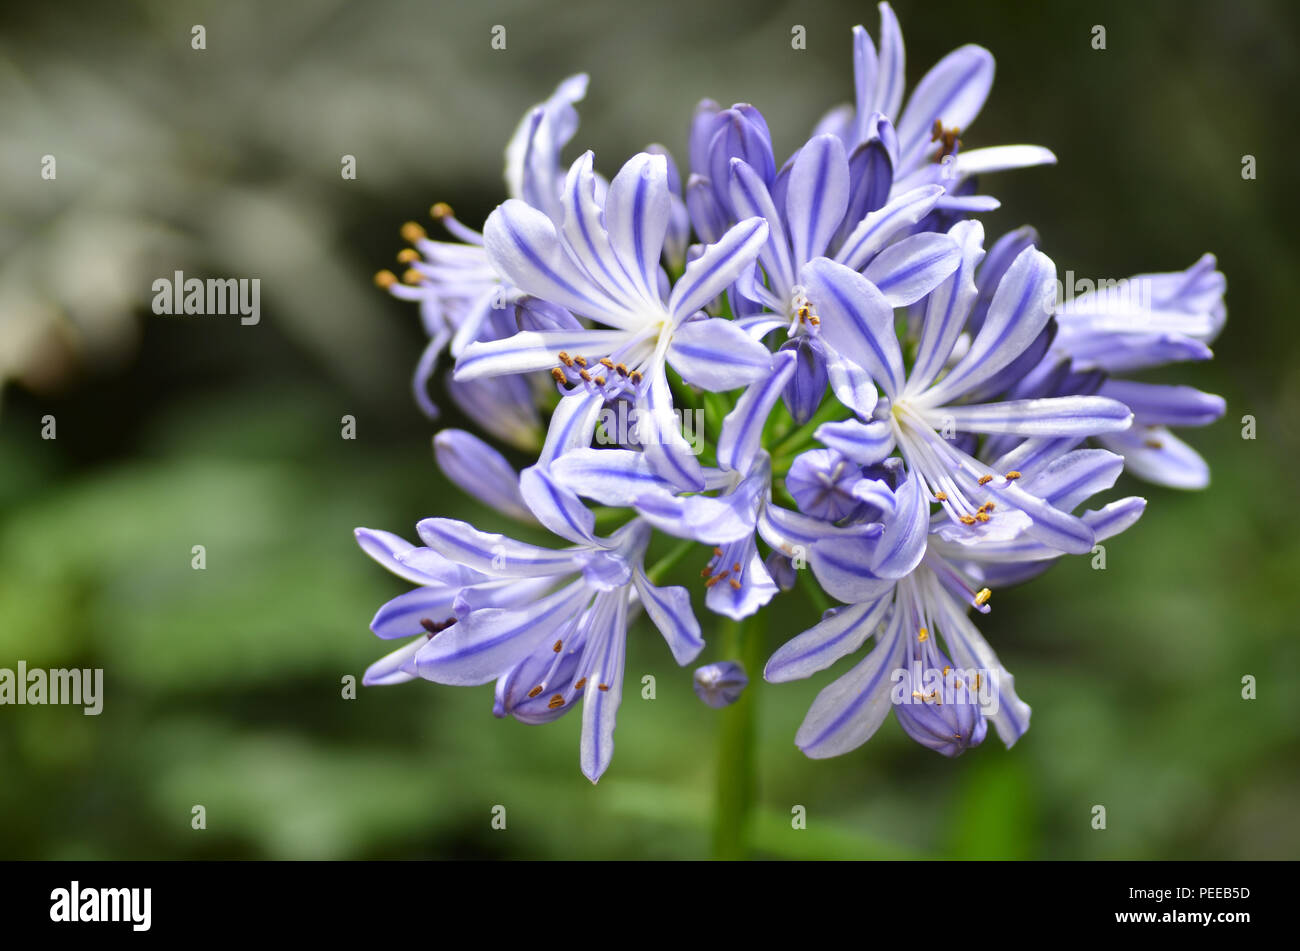 Blue and white blooming flowers of the Agapanthus in a border in the garden Stock Photo